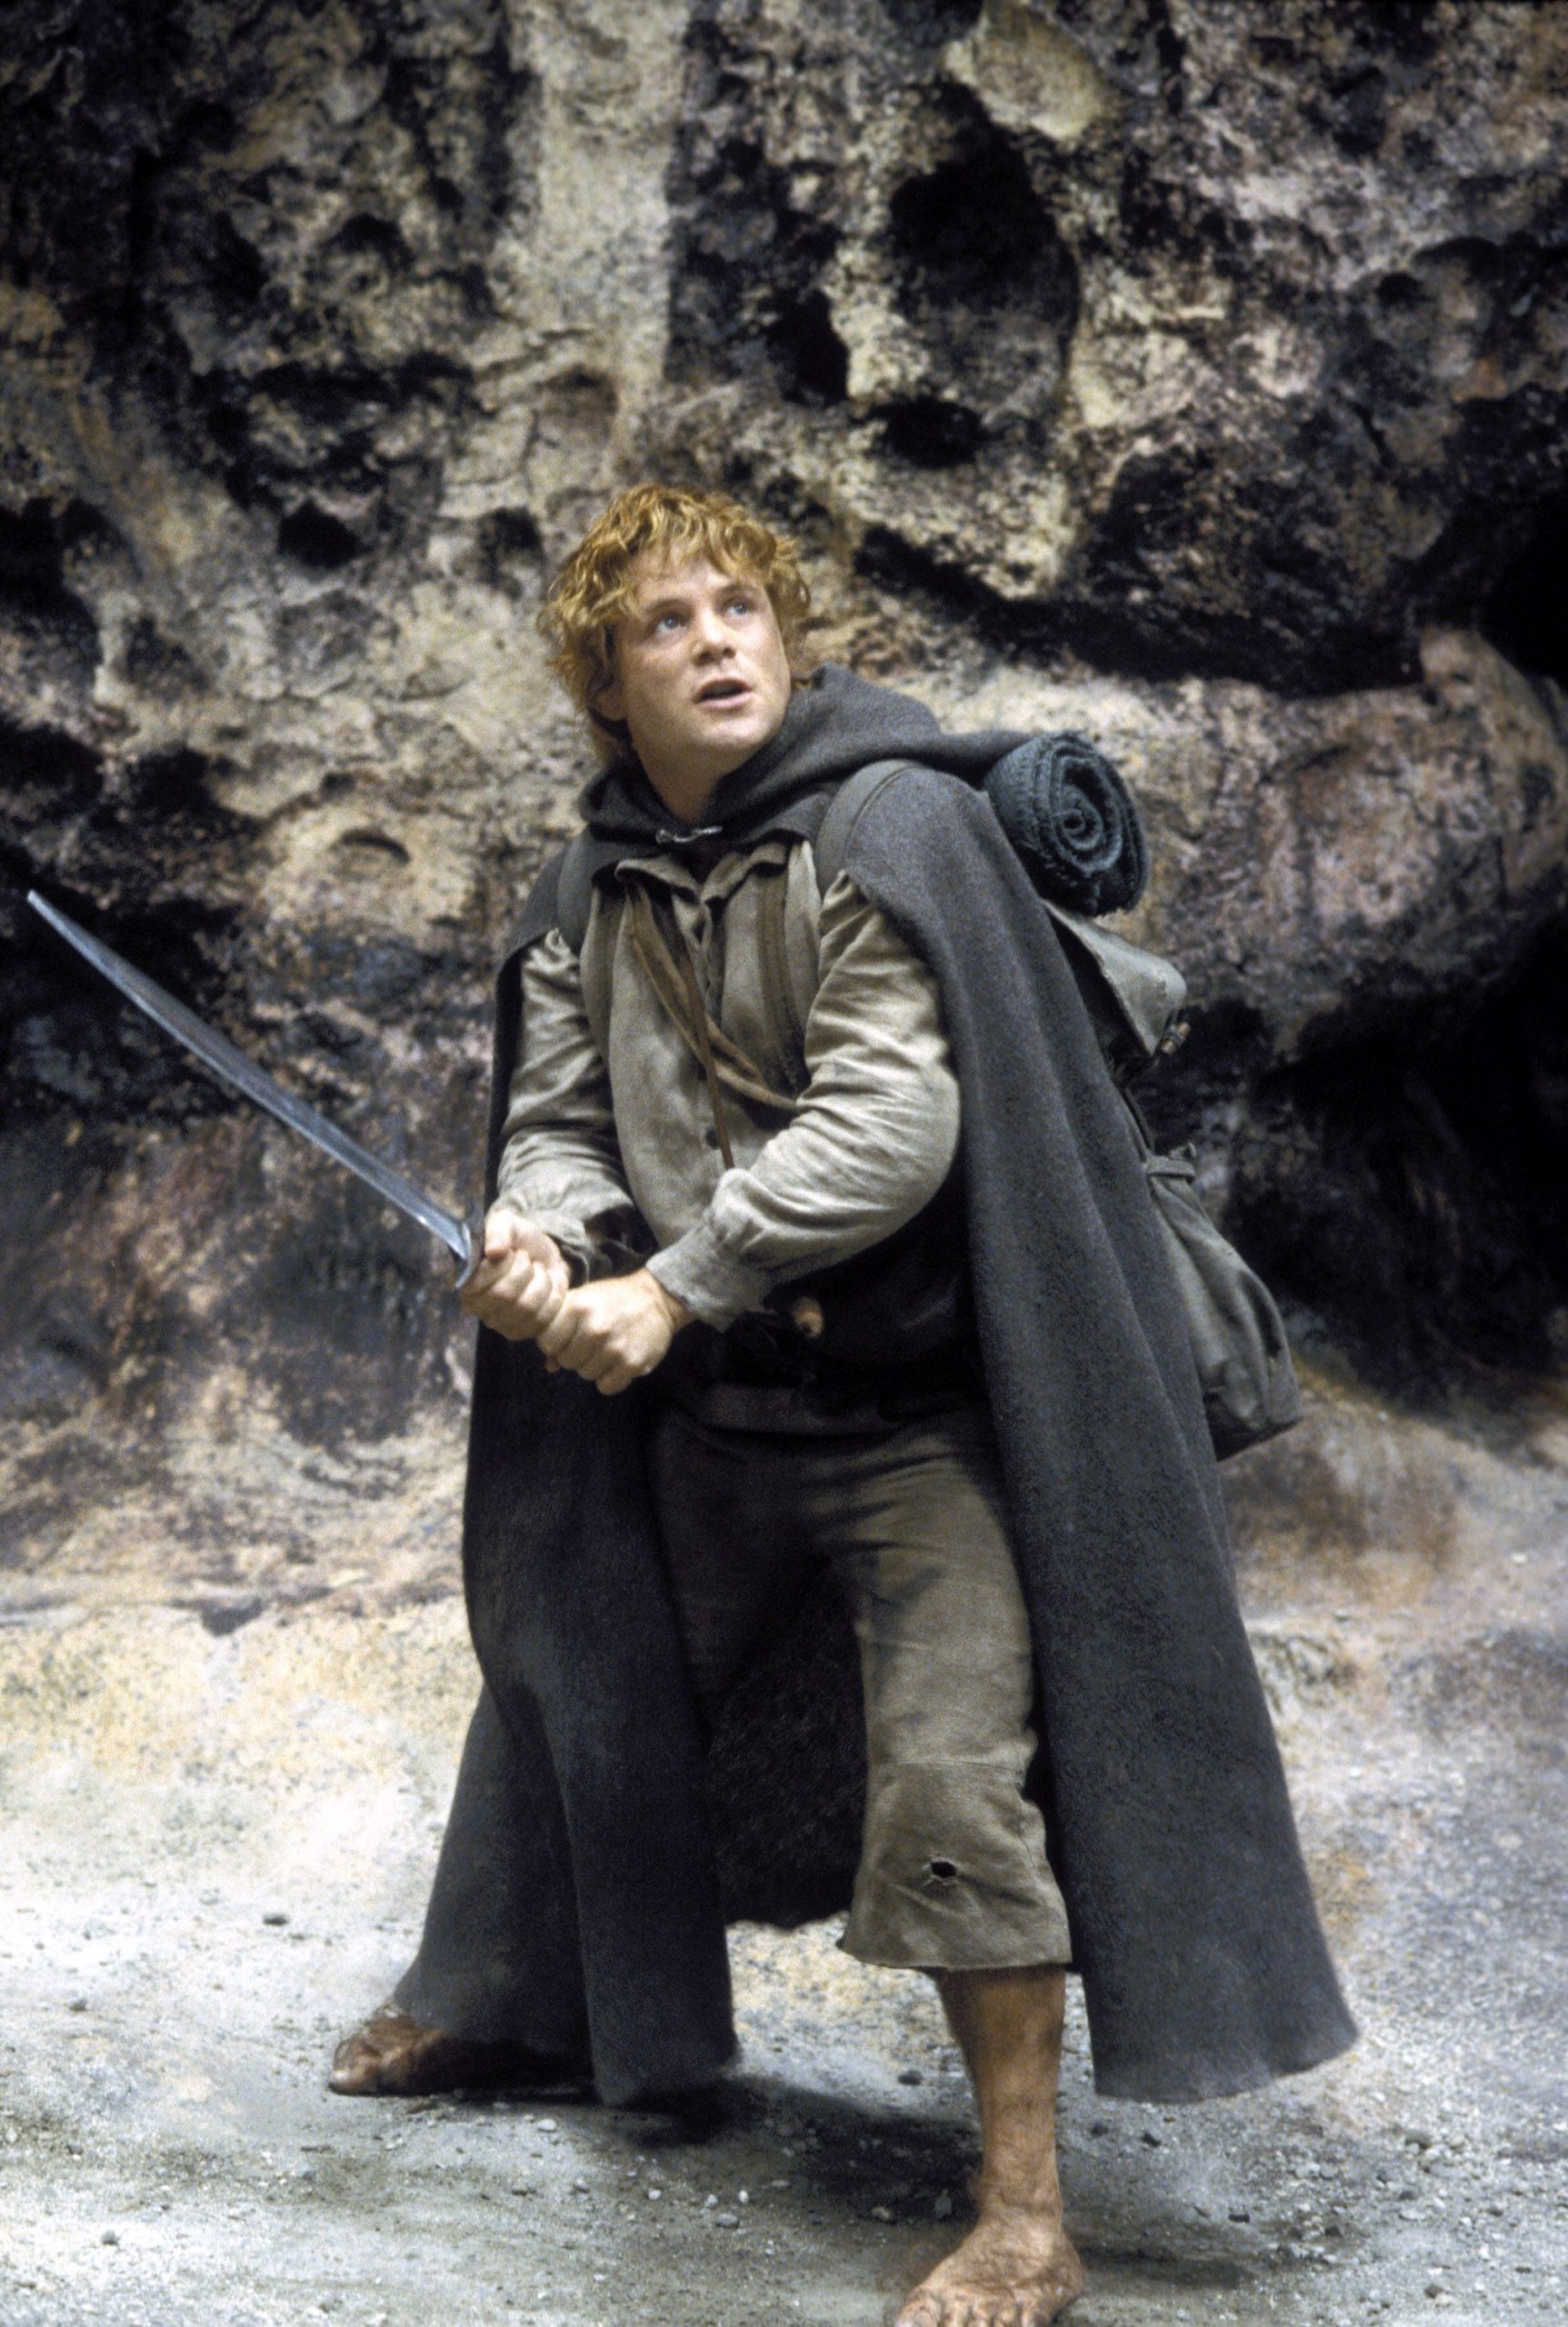 Samwise the hobbit stands defiantly with both hands on his sword as he looks upwards. He wears a grey tunic over his beige clothes. 